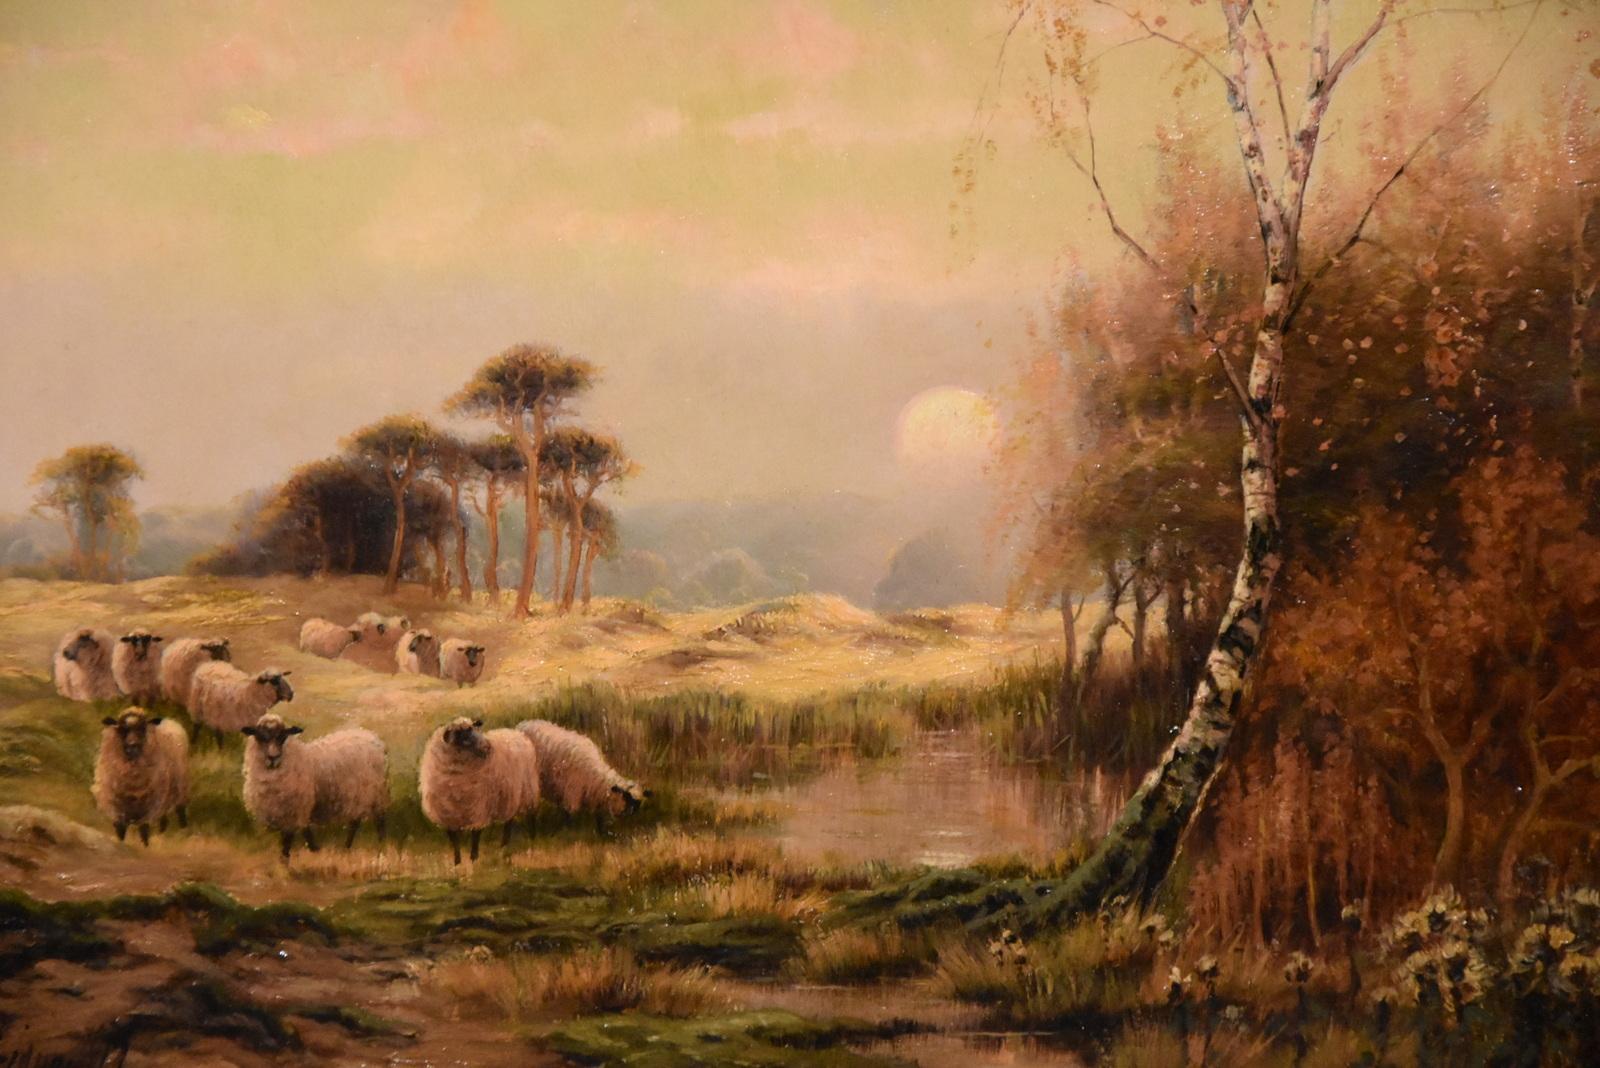 “October Moon” and “Evening” Pair of Oil Paint Animal Paintings by Sidney Pike

“October Moon” and “Evening” a pair by Sidney Pike 1858-1923. London Landscape painter of the first Christmas card illustrators. Settled in Hastings and represented in